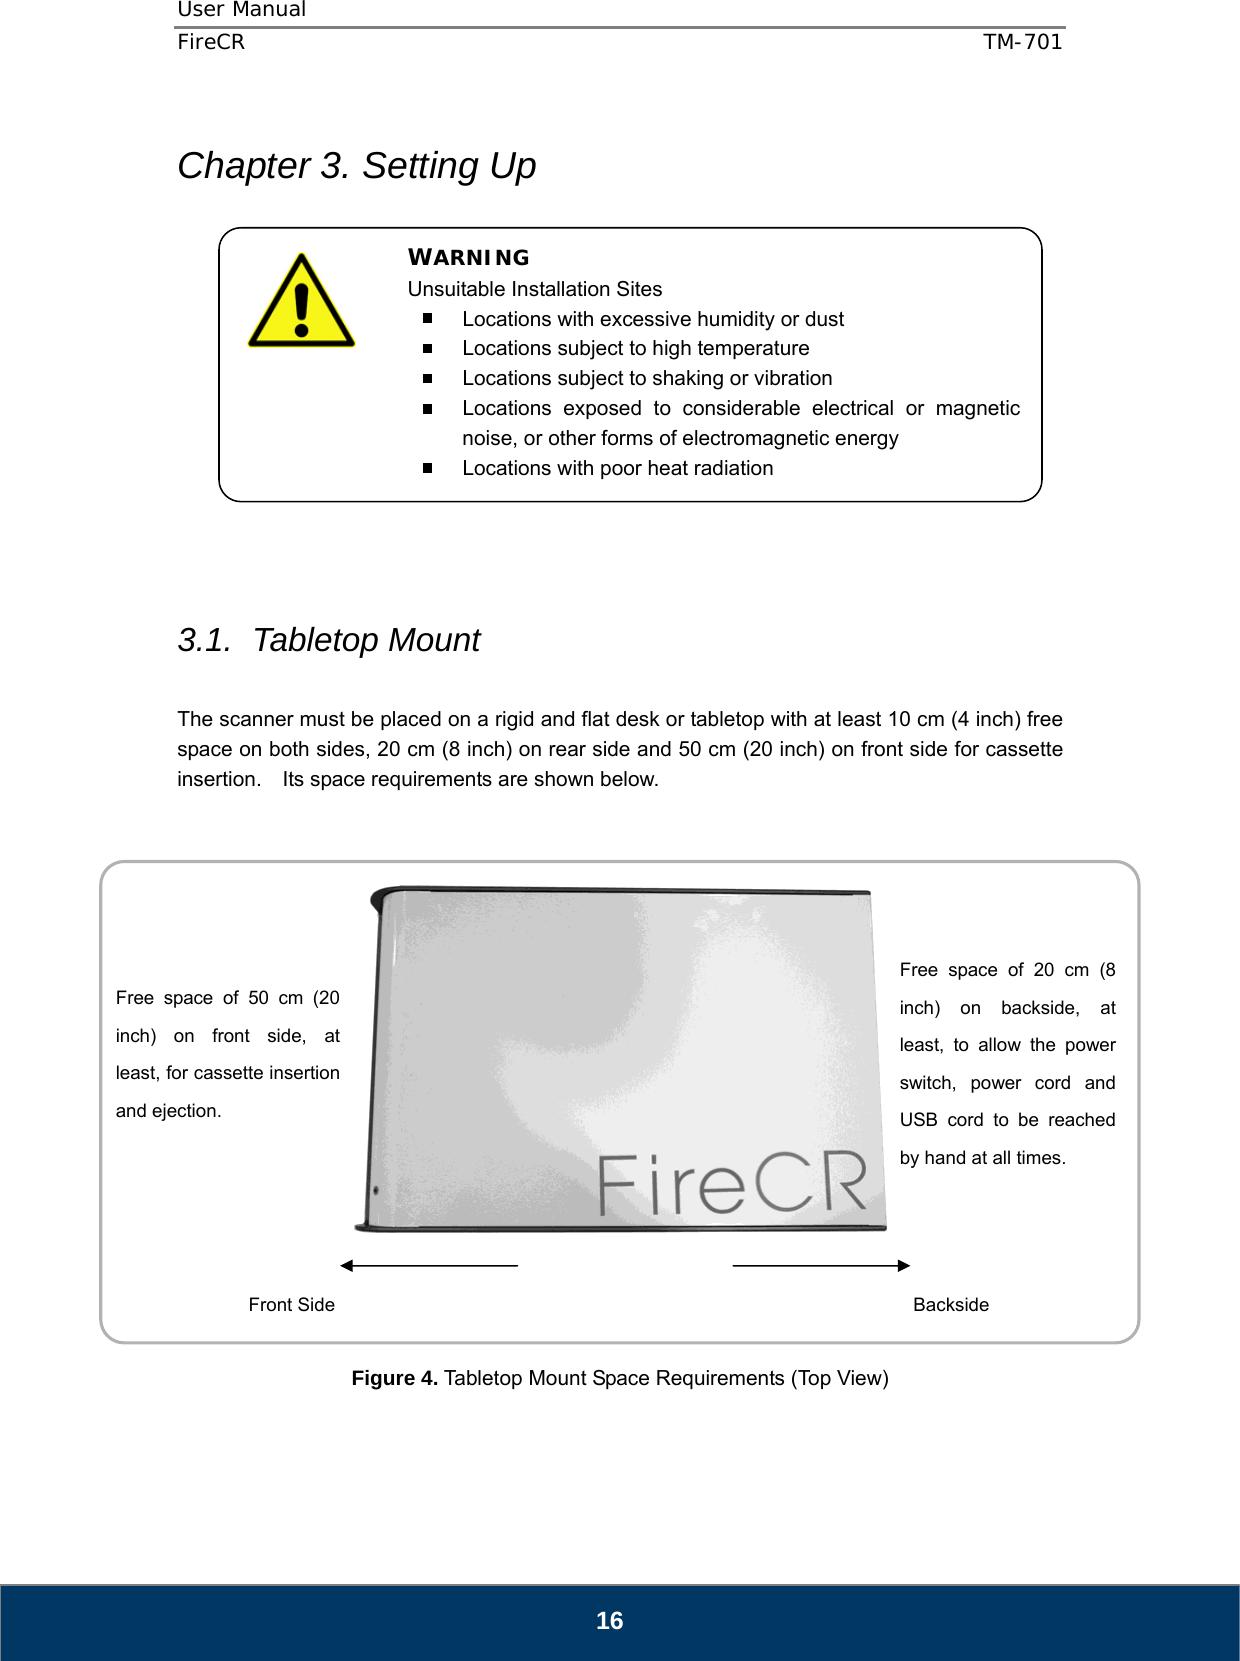 User Manual  FireCR  TM-701   16  Chapter 3. Setting Up              3.1. Tabletop Mount  The scanner must be placed on a rigid and flat desk or tabletop with at least 10 cm (4 inch) free space on both sides, 20 cm (8 inch) on rear side and 50 cm (20 inch) on front side for cassette insertion.    Its space requirements are shown below.       Figure 4. Tabletop Mount Space Requirements (Top View)   Free space of 20 cm (8 inch) on backside, at least, to allow the power switch, power cord and USB cord to be reached by hand at all times. Free space of 50 cm (20 inch) on front side, at least, for cassette insertion and ejection. Front Side  Backside WARNING Unsuitable Installation Sites   Locations with excessive humidity or dust   Locations subject to high temperature   Locations subject to shaking or vibration   Locations exposed to considerable electrical or magnetic noise, or other forms of electromagnetic energy   Locations with poor heat radiation  